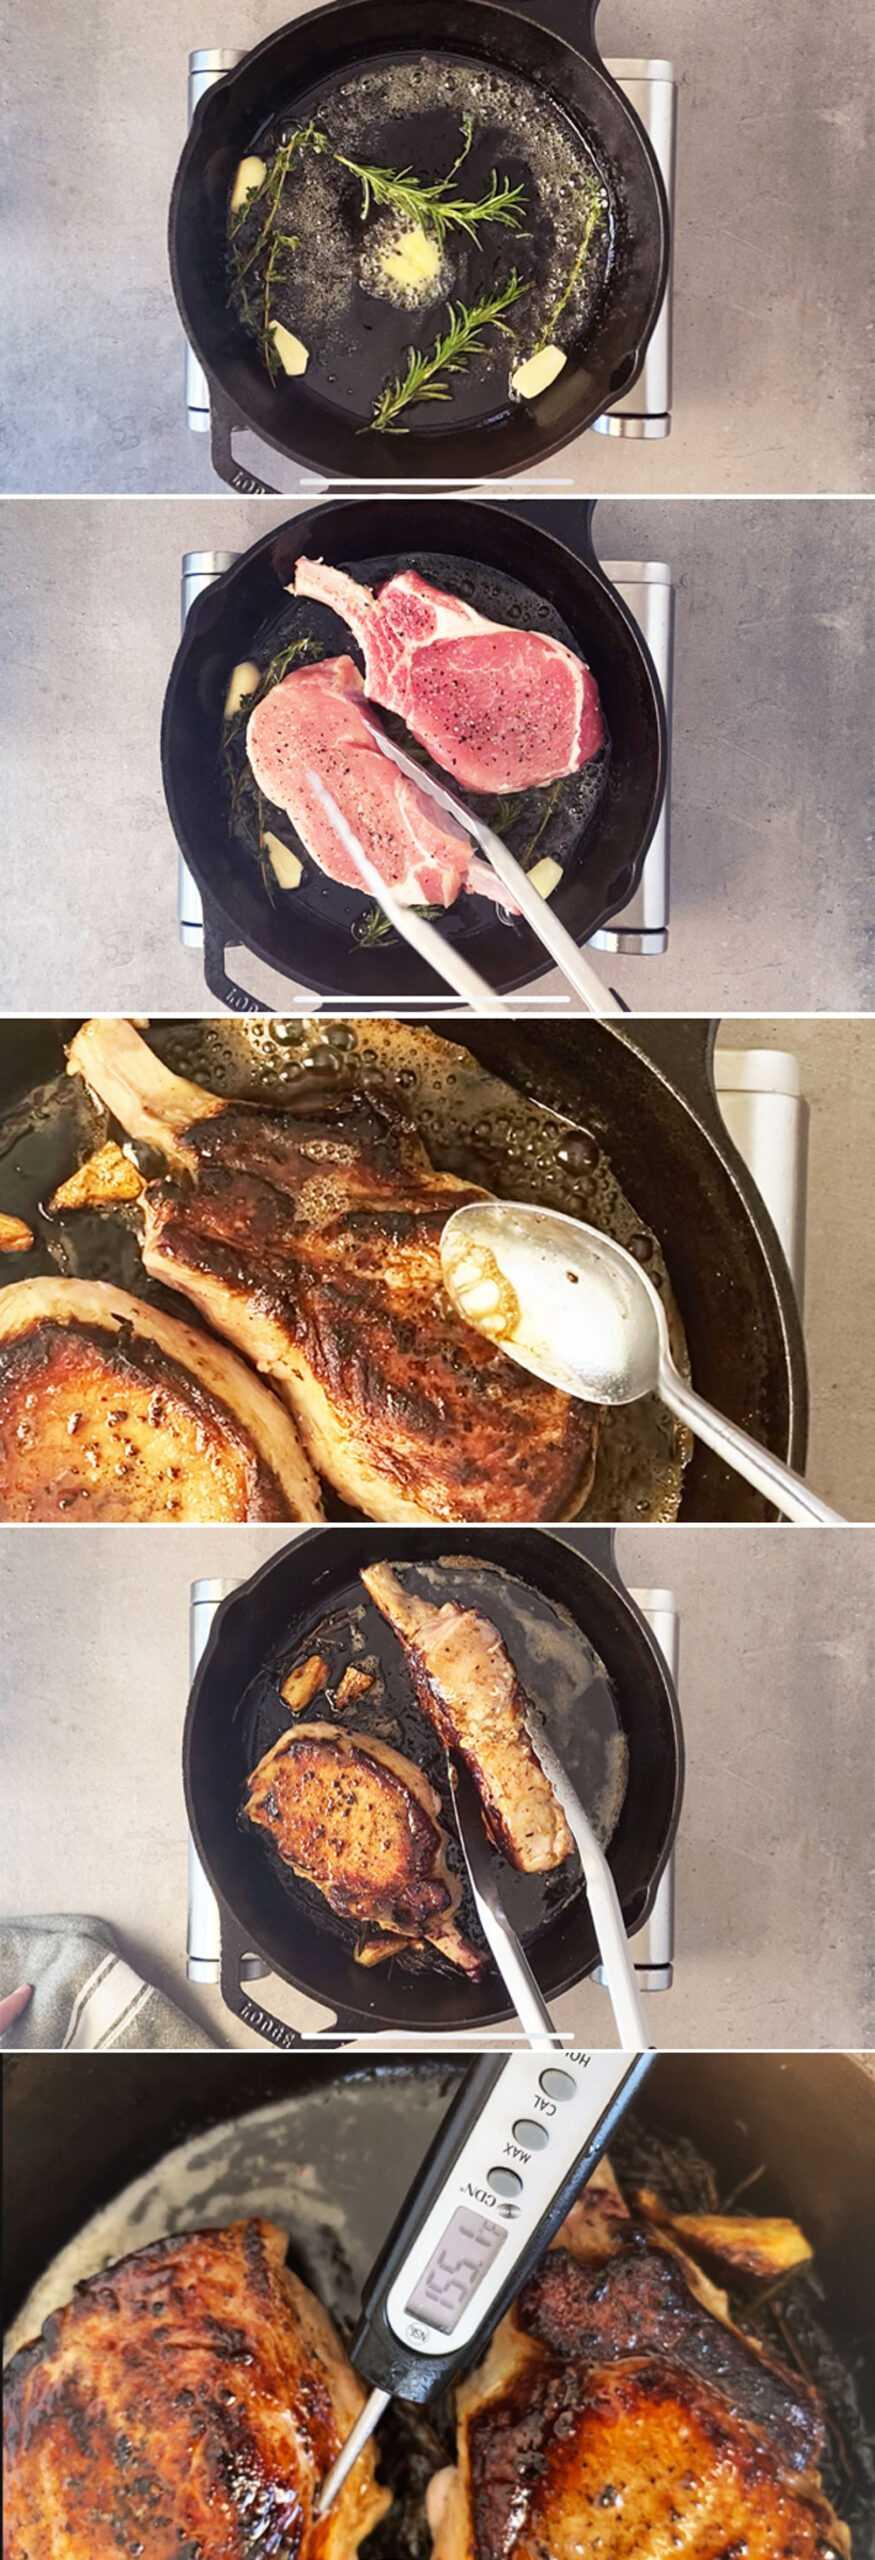 How to make pork chops in a cast iron skillet step by step